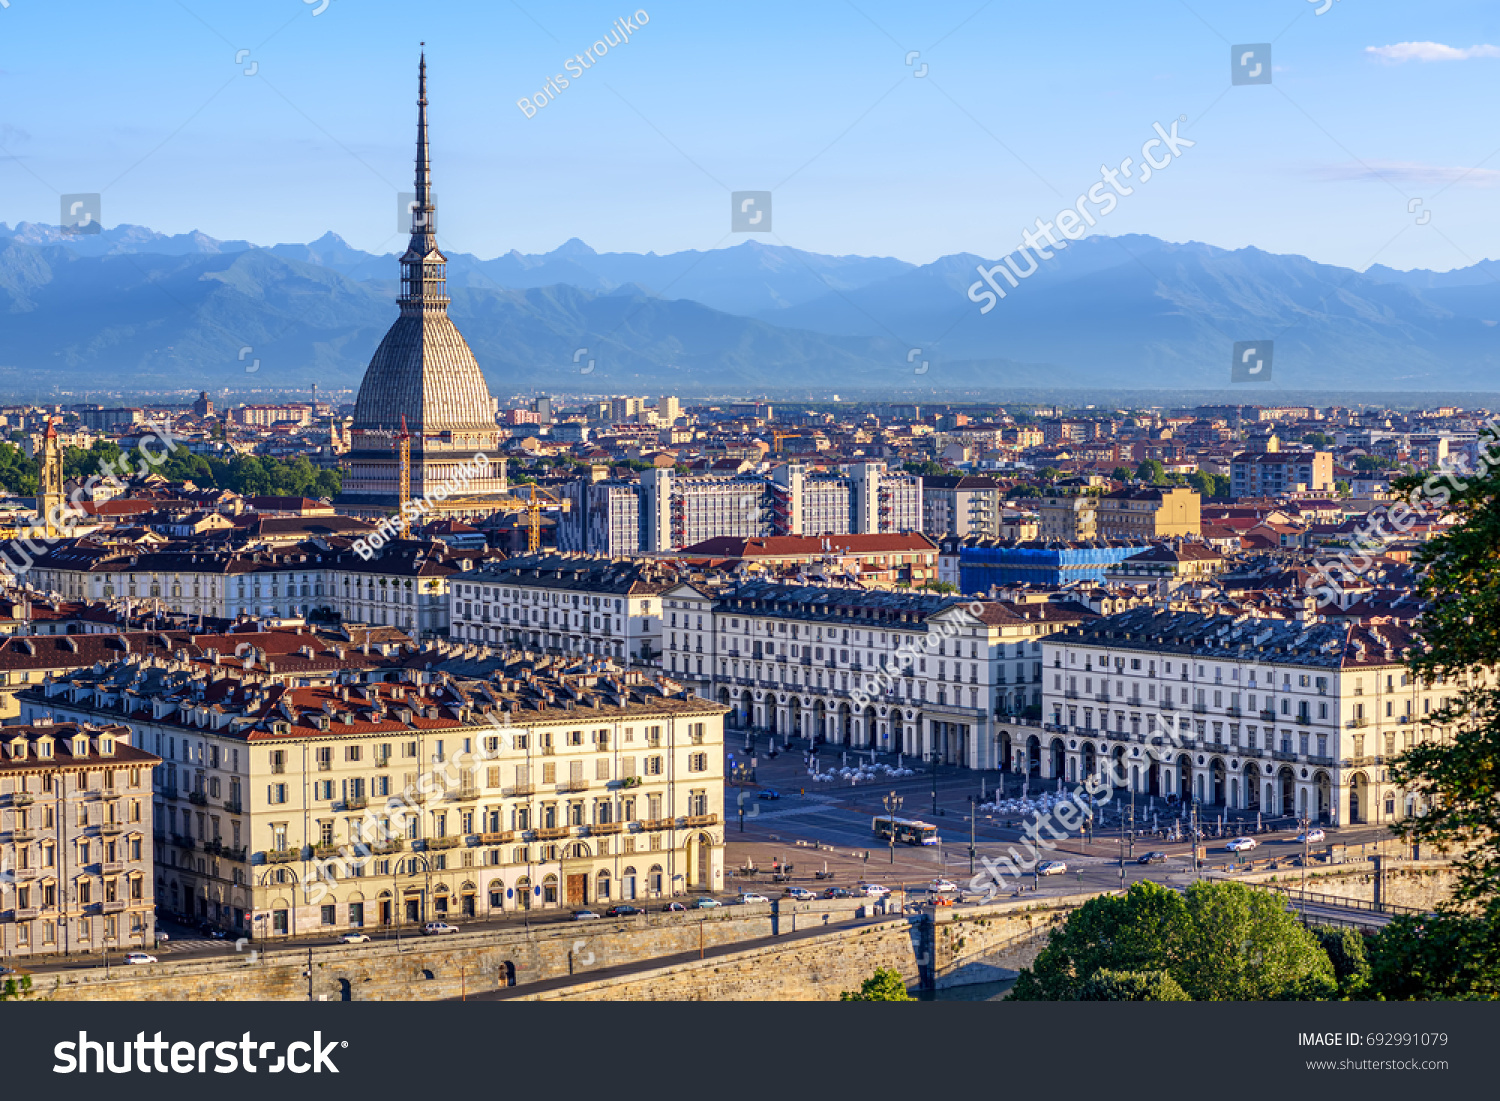 The city center of Turin with Mole Antonelliana tower and Alps mountains panorama, Turin, Italy #692991079